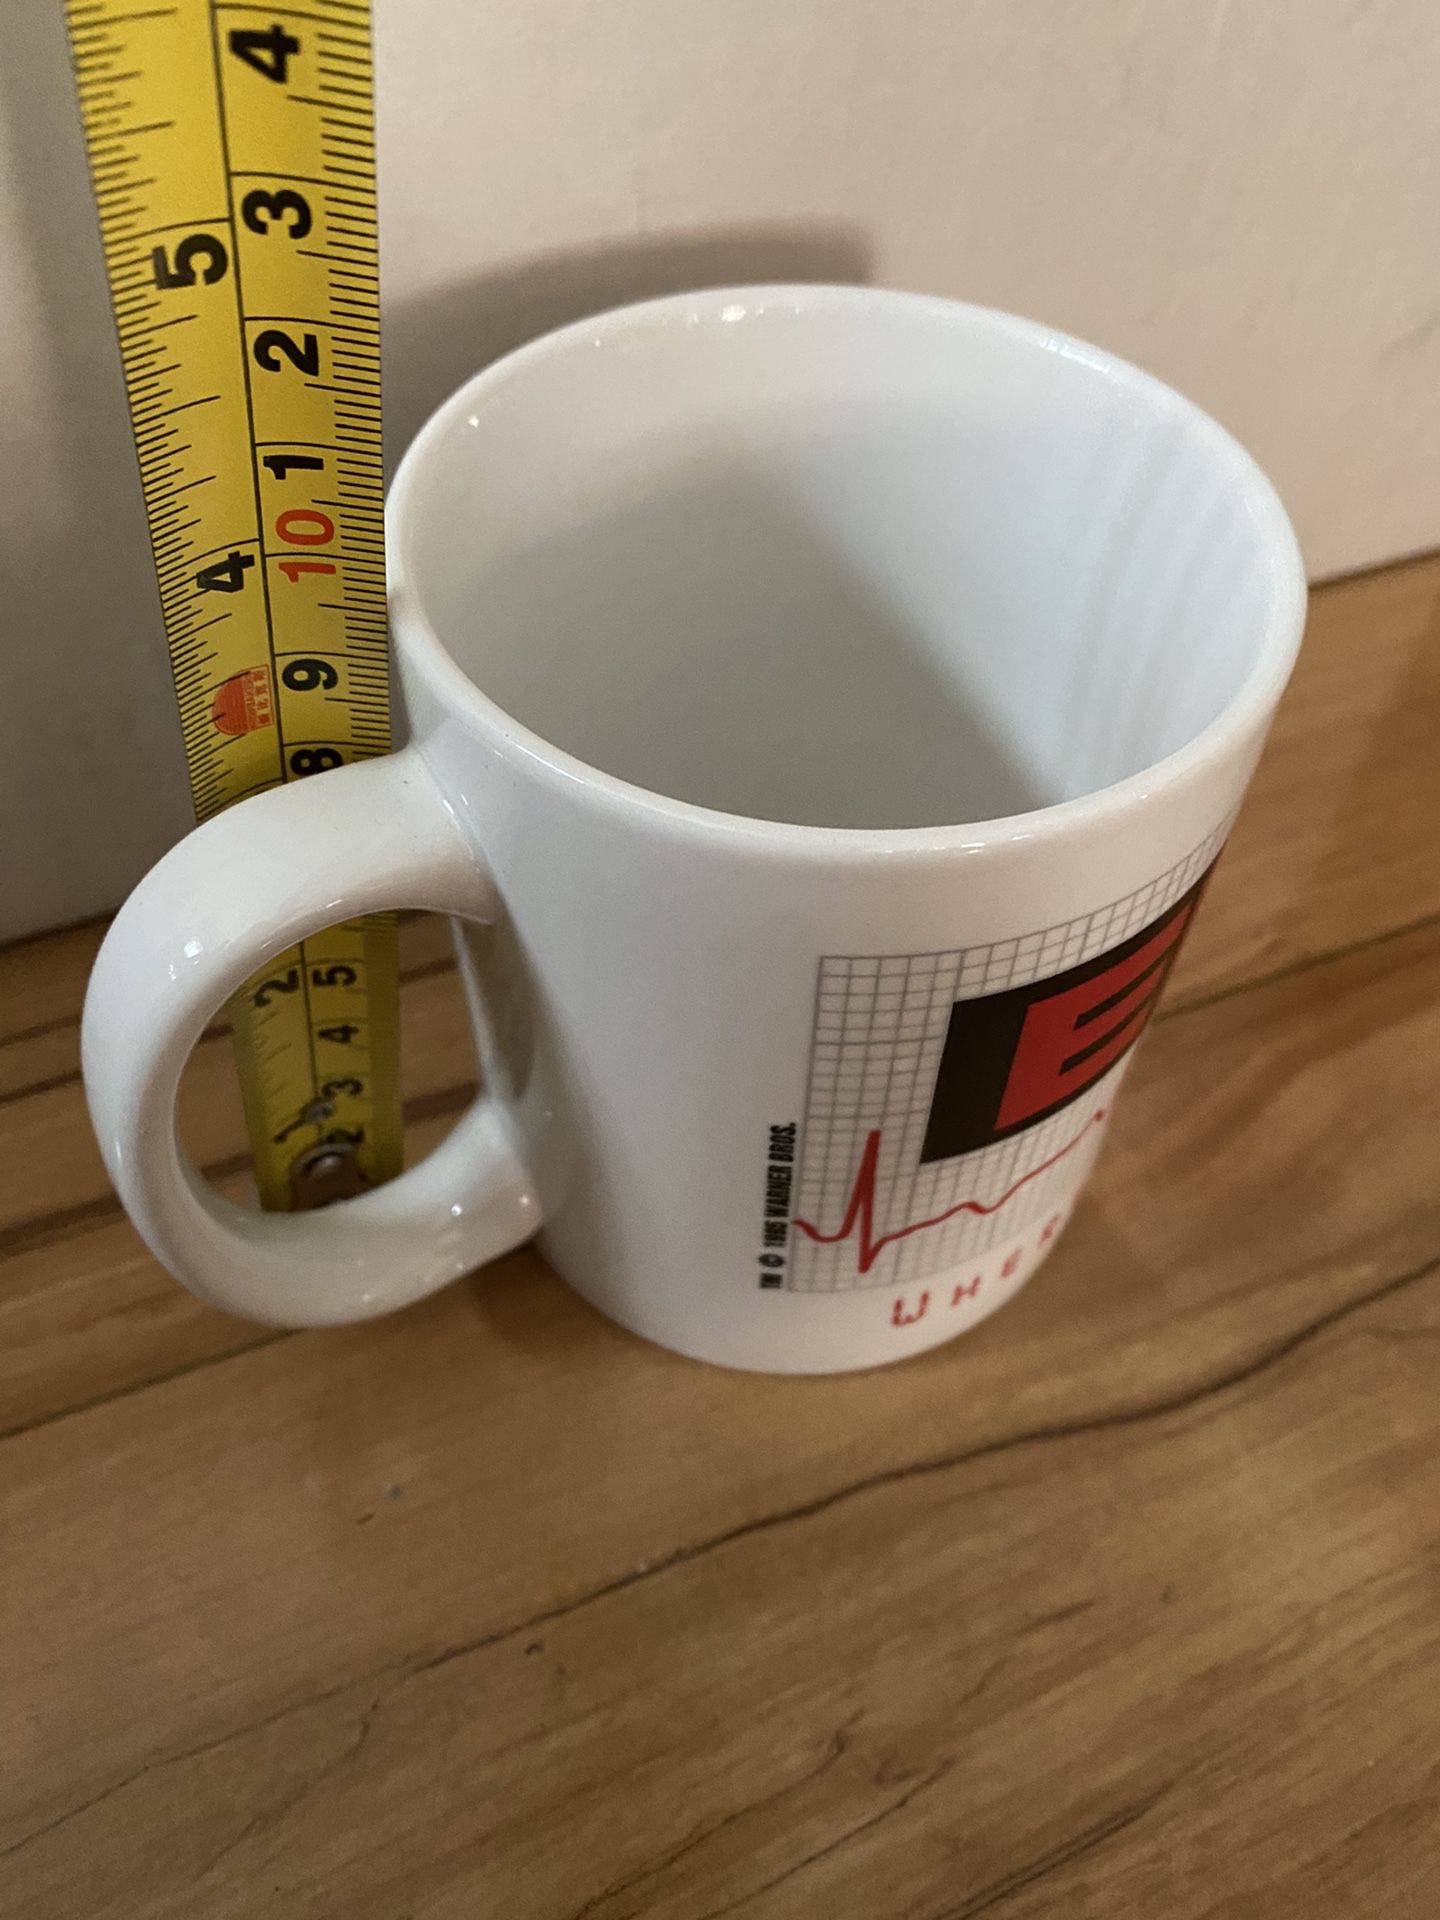 ER TV Show Coffee Cup Mug "Where Everything Is Stat" Warner Bros 1995 Doctor